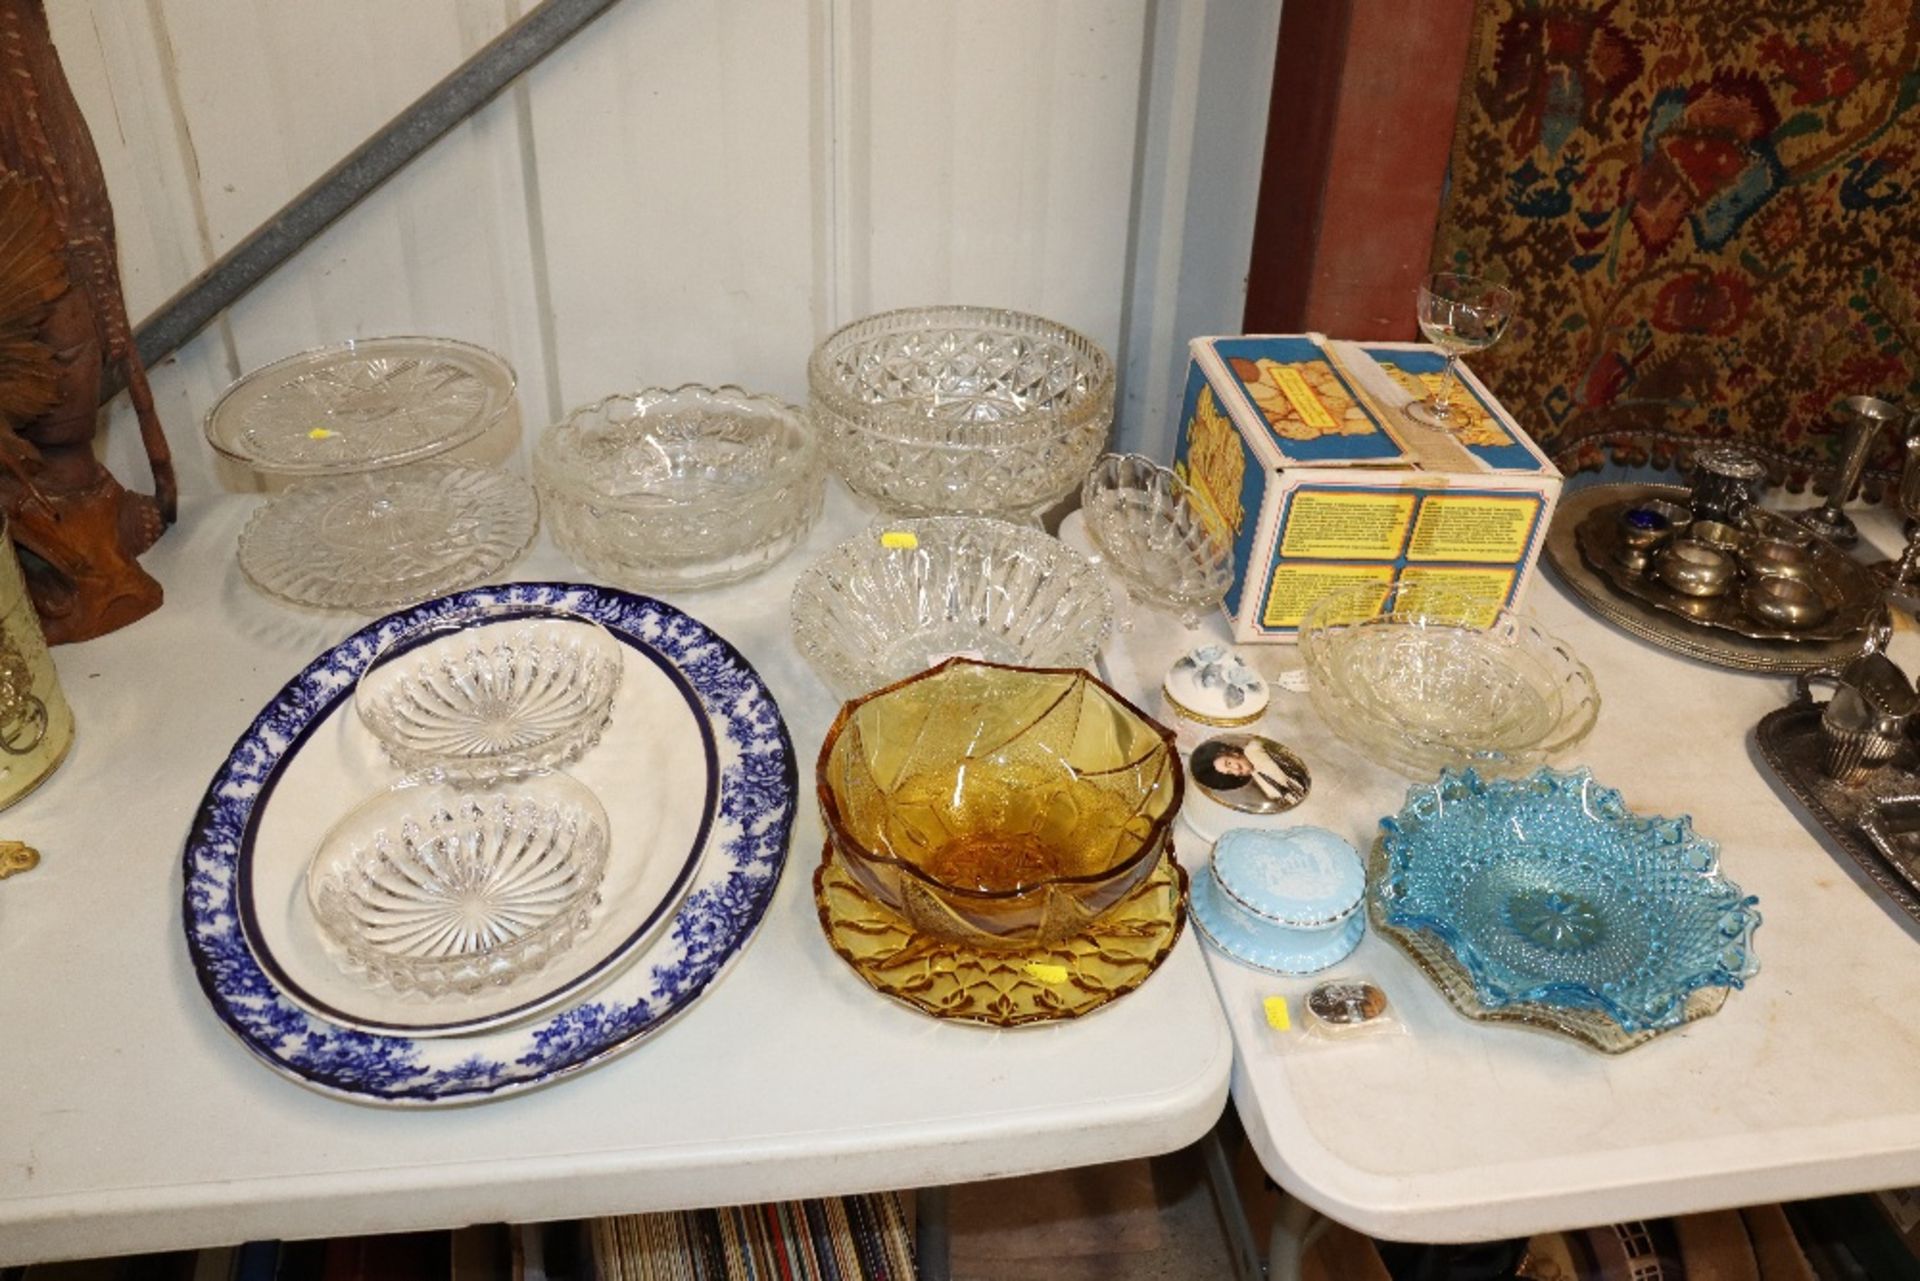 A quantity of various glassware, a blue and white